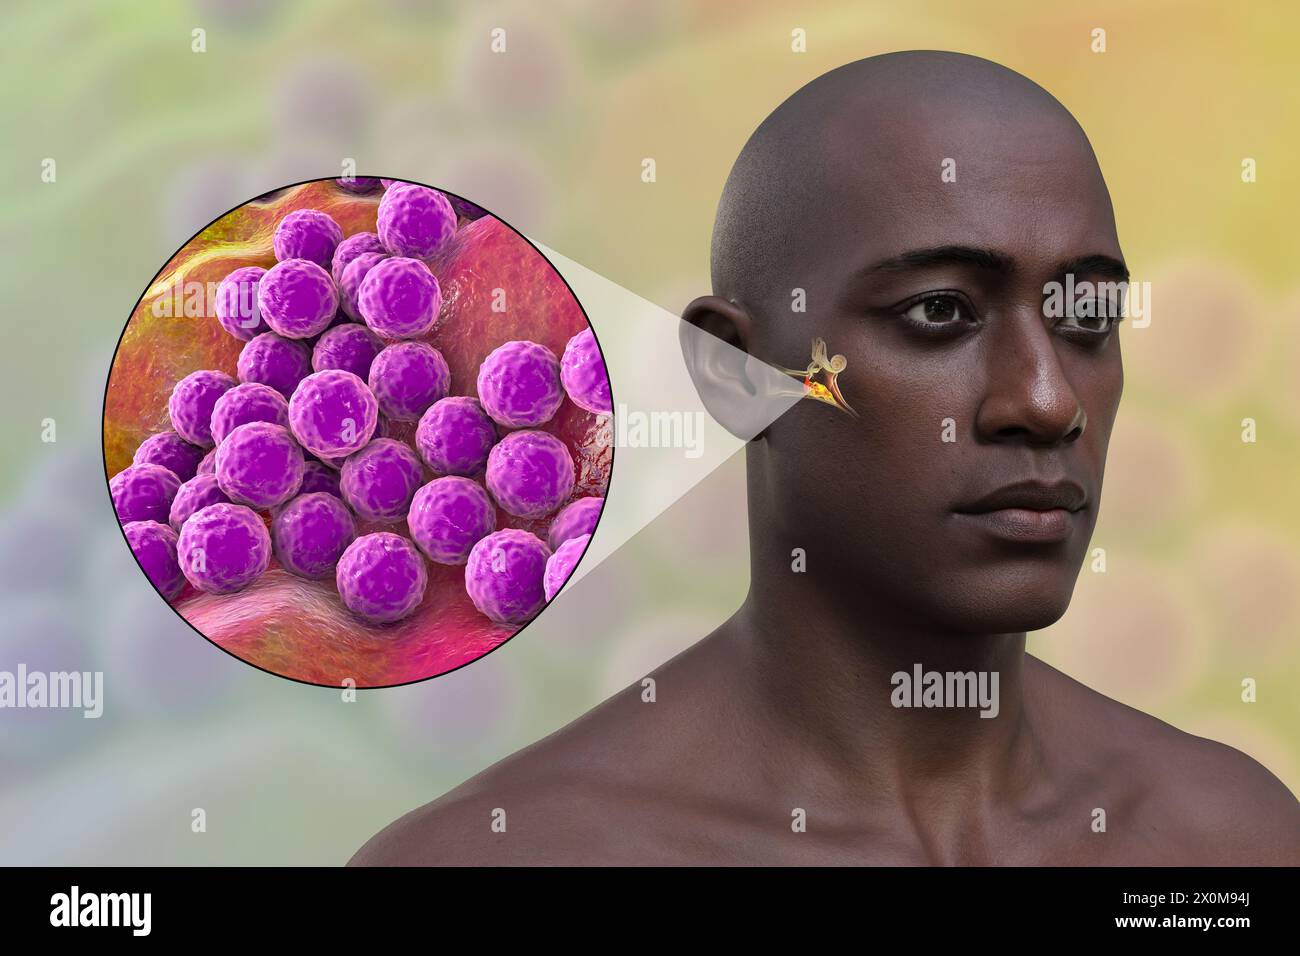 3D illustration of a man with a bacterial infection of the middle ear (otitis media) and a close-up of the causative bacteria, Staphylococcus aureus. Symptoms include inflammation, fluid build-up and pain in the ear. Stock Photo